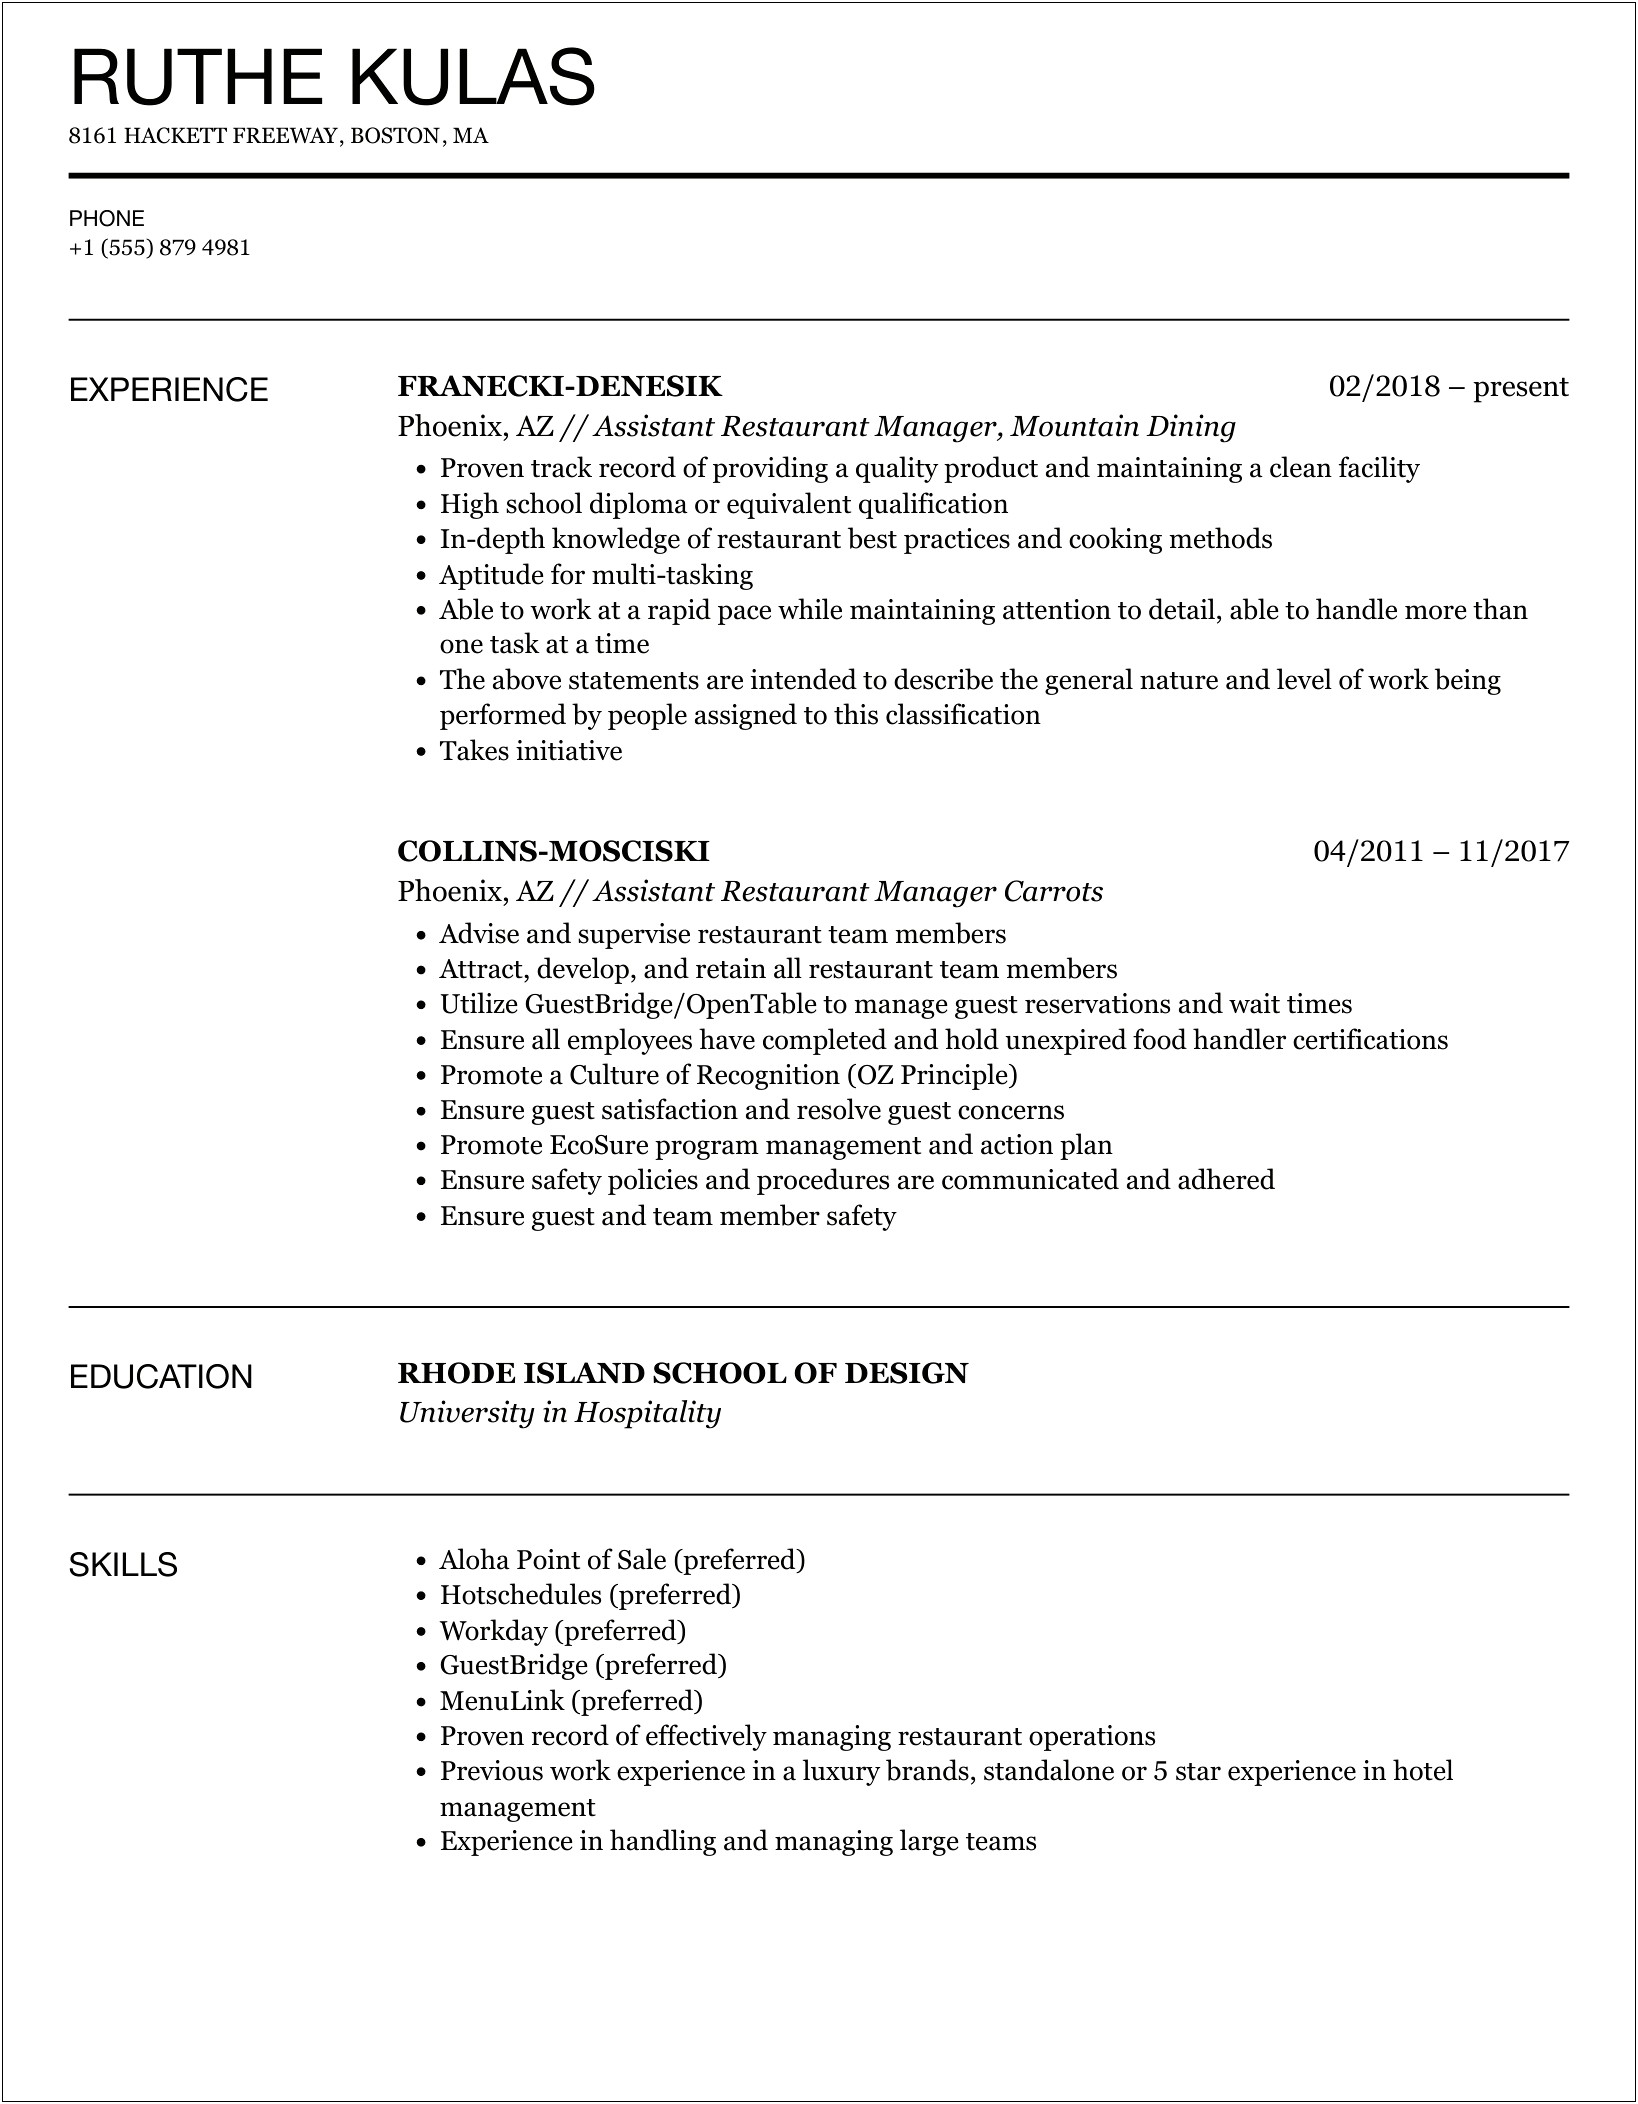 Resume For Assistant Manager In Restaurant